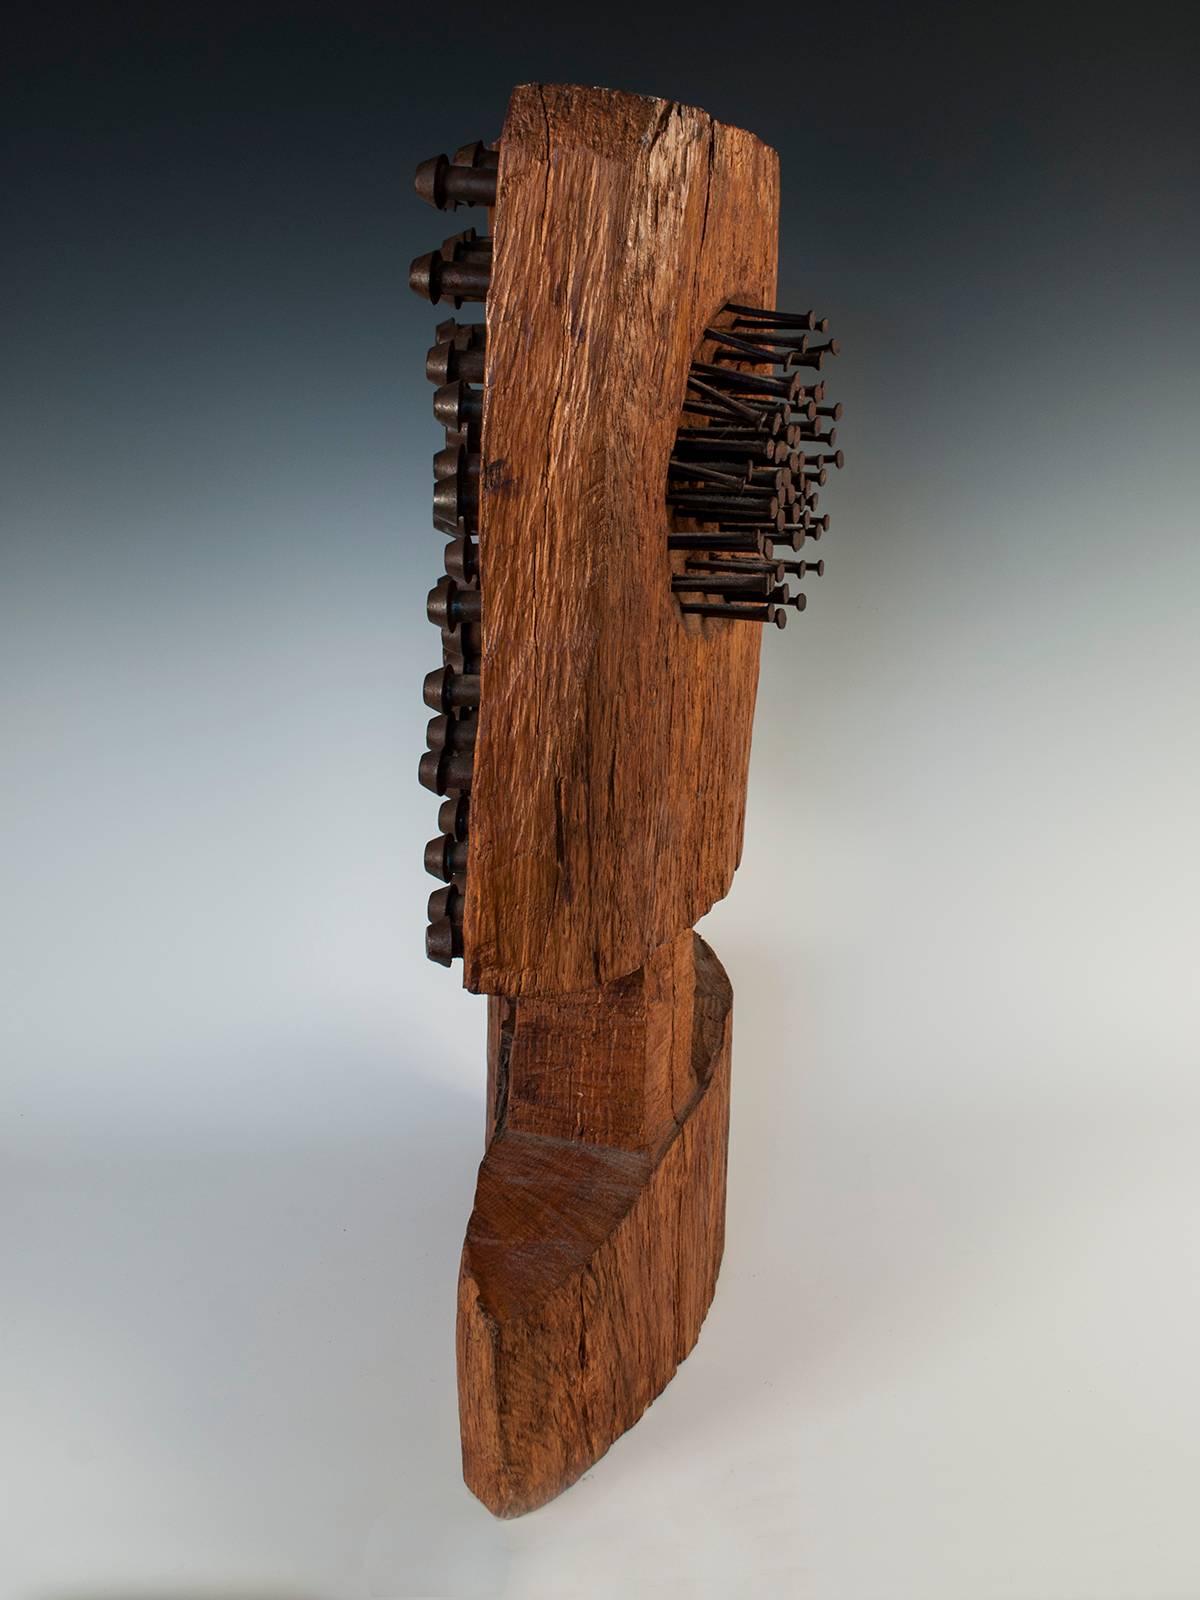 American Midcentury Wood, Stud and Nail Brutalist Sculpture by an Unknown Artist